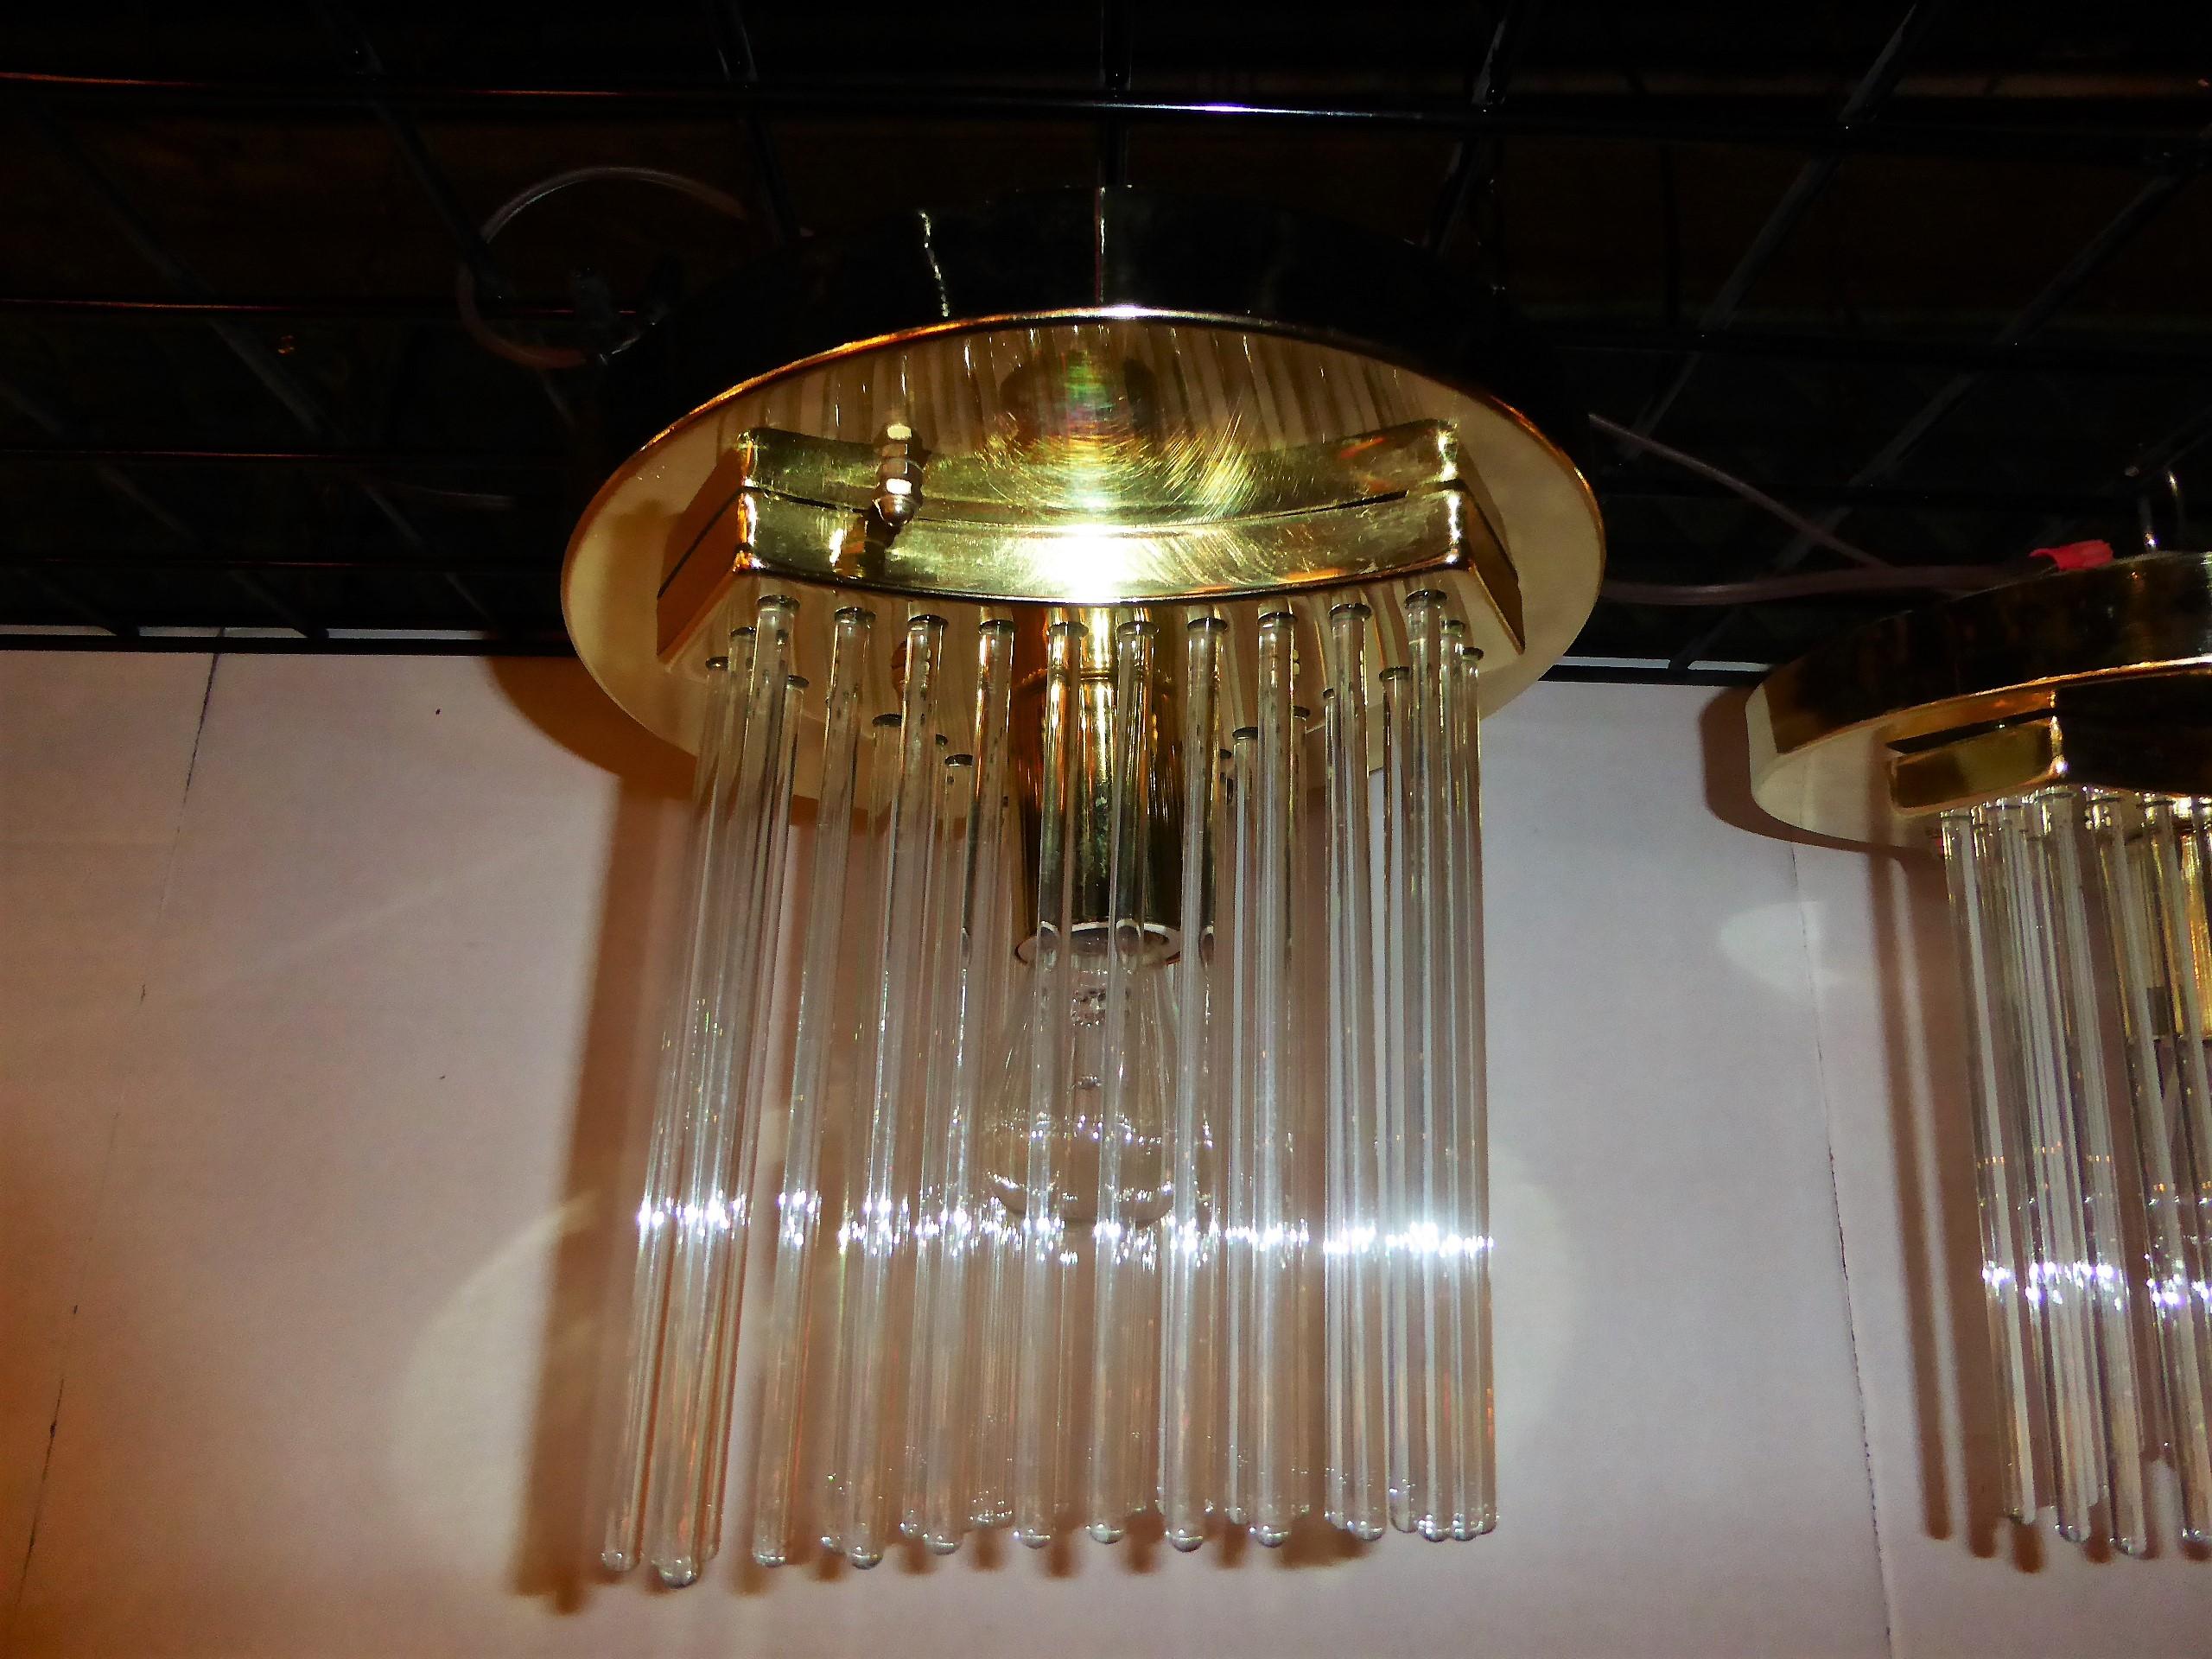 REDUCED FROM $1,800....Fine 1970s Gaetano Sciolari flush mount ceiling lights in brass with glass rods in a waterfall trifoil rectangular form surrounding the light source. Each with a single medium base bulb socket. Each with 33 blown glass rods.